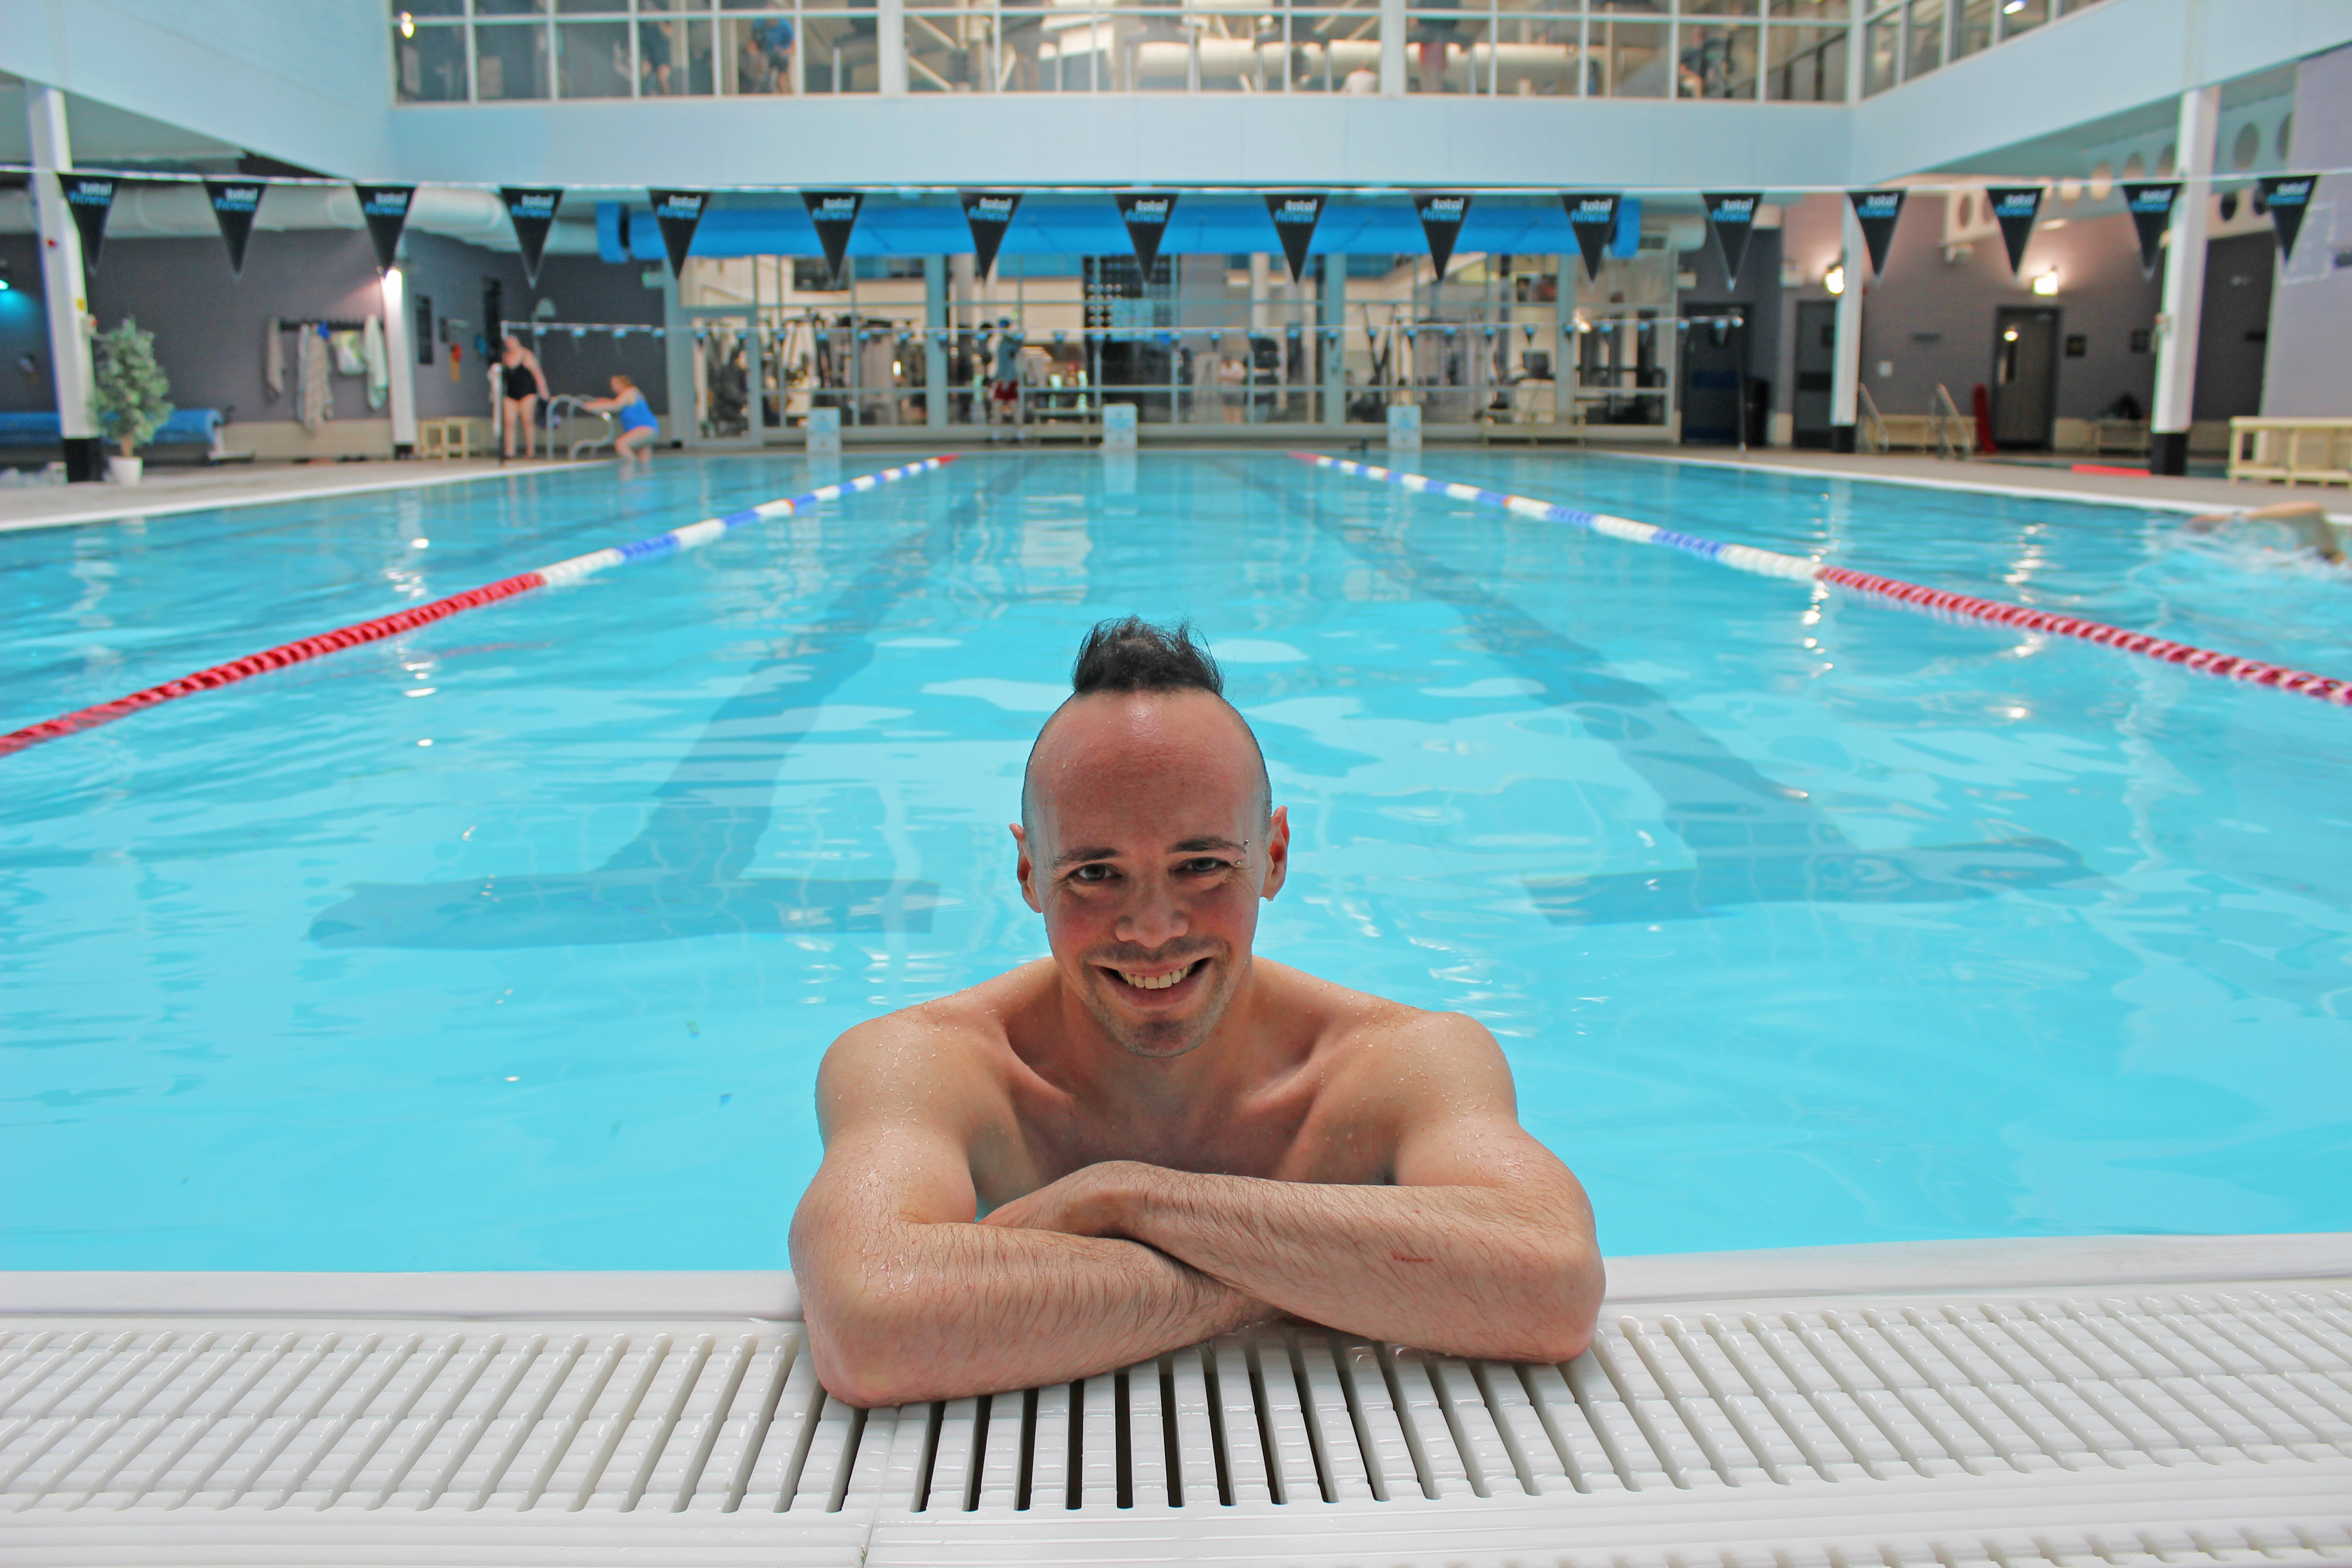  Man to swim 21 miles the equivalent of the English Channel in a swimming pool over 30 days to raise money for Francis House Children’s Hospice 